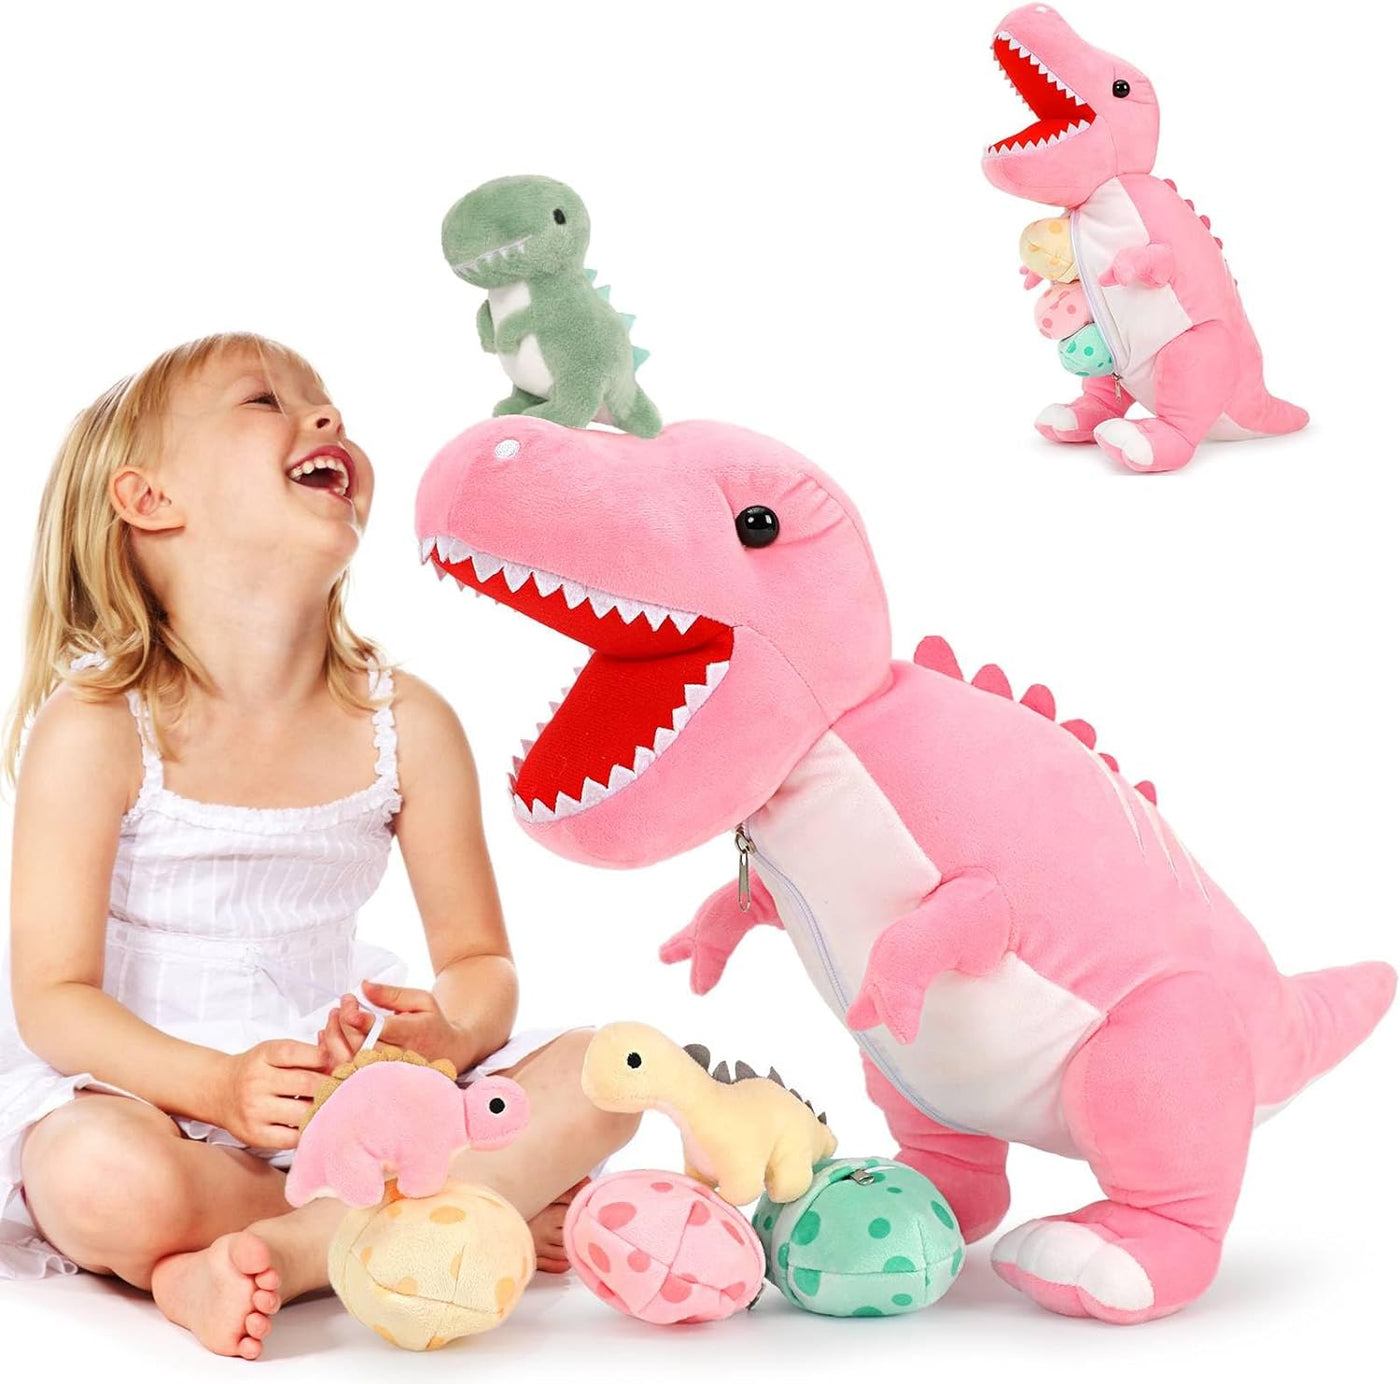 Dinosaur Stuffed Toy with 3 Baby Dinosaurs, 23.6 Inches